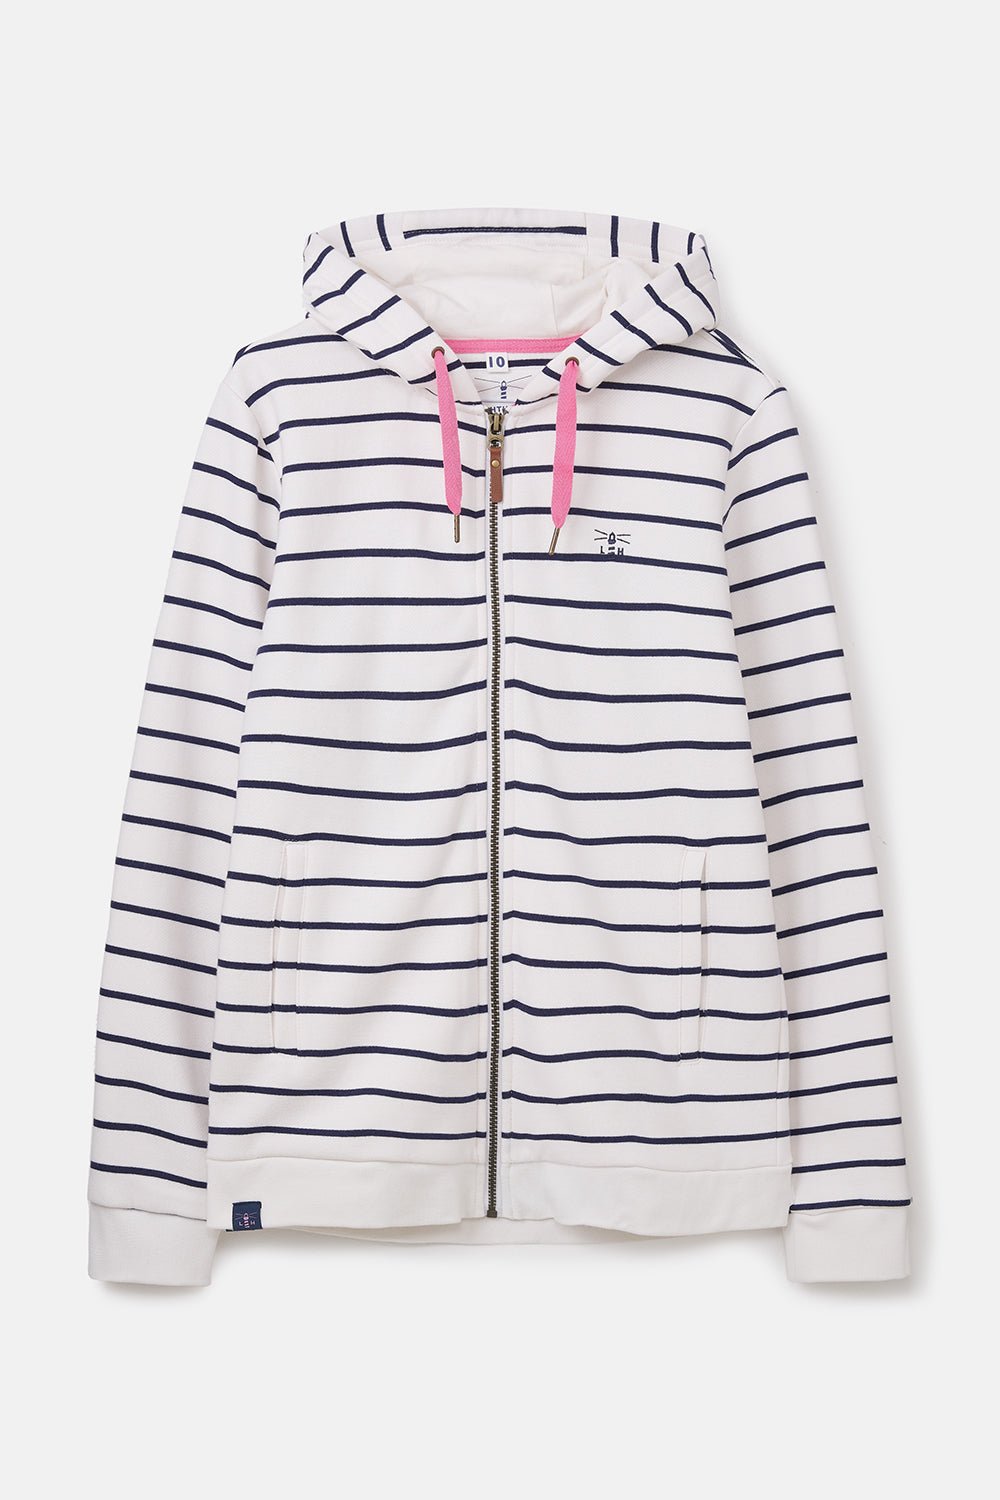 Strand Hooded Top - Navy Striped - Lighthouse